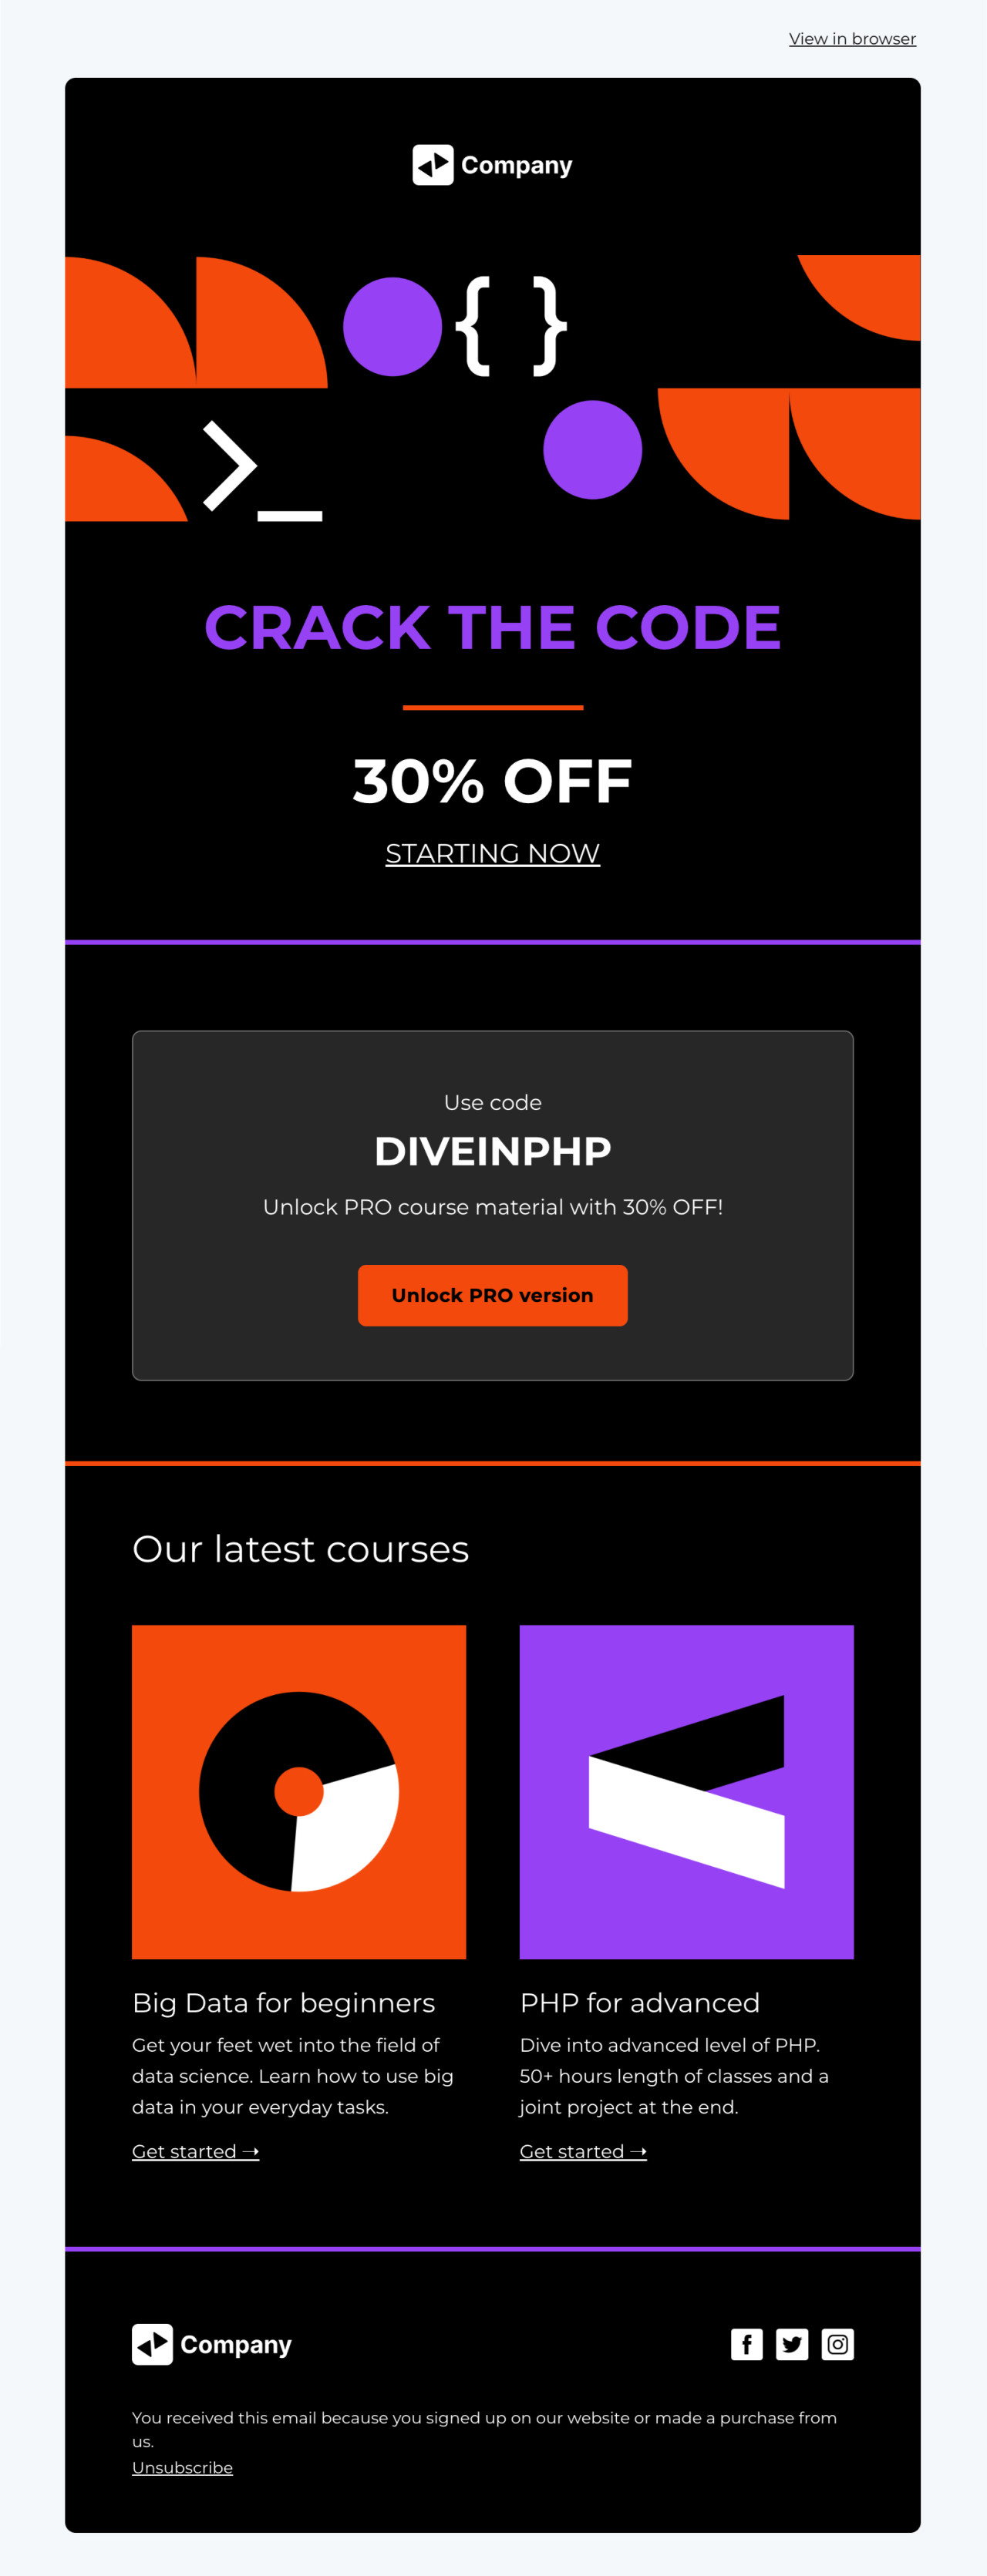 Black Friday courses sale template - Made by MailerLite